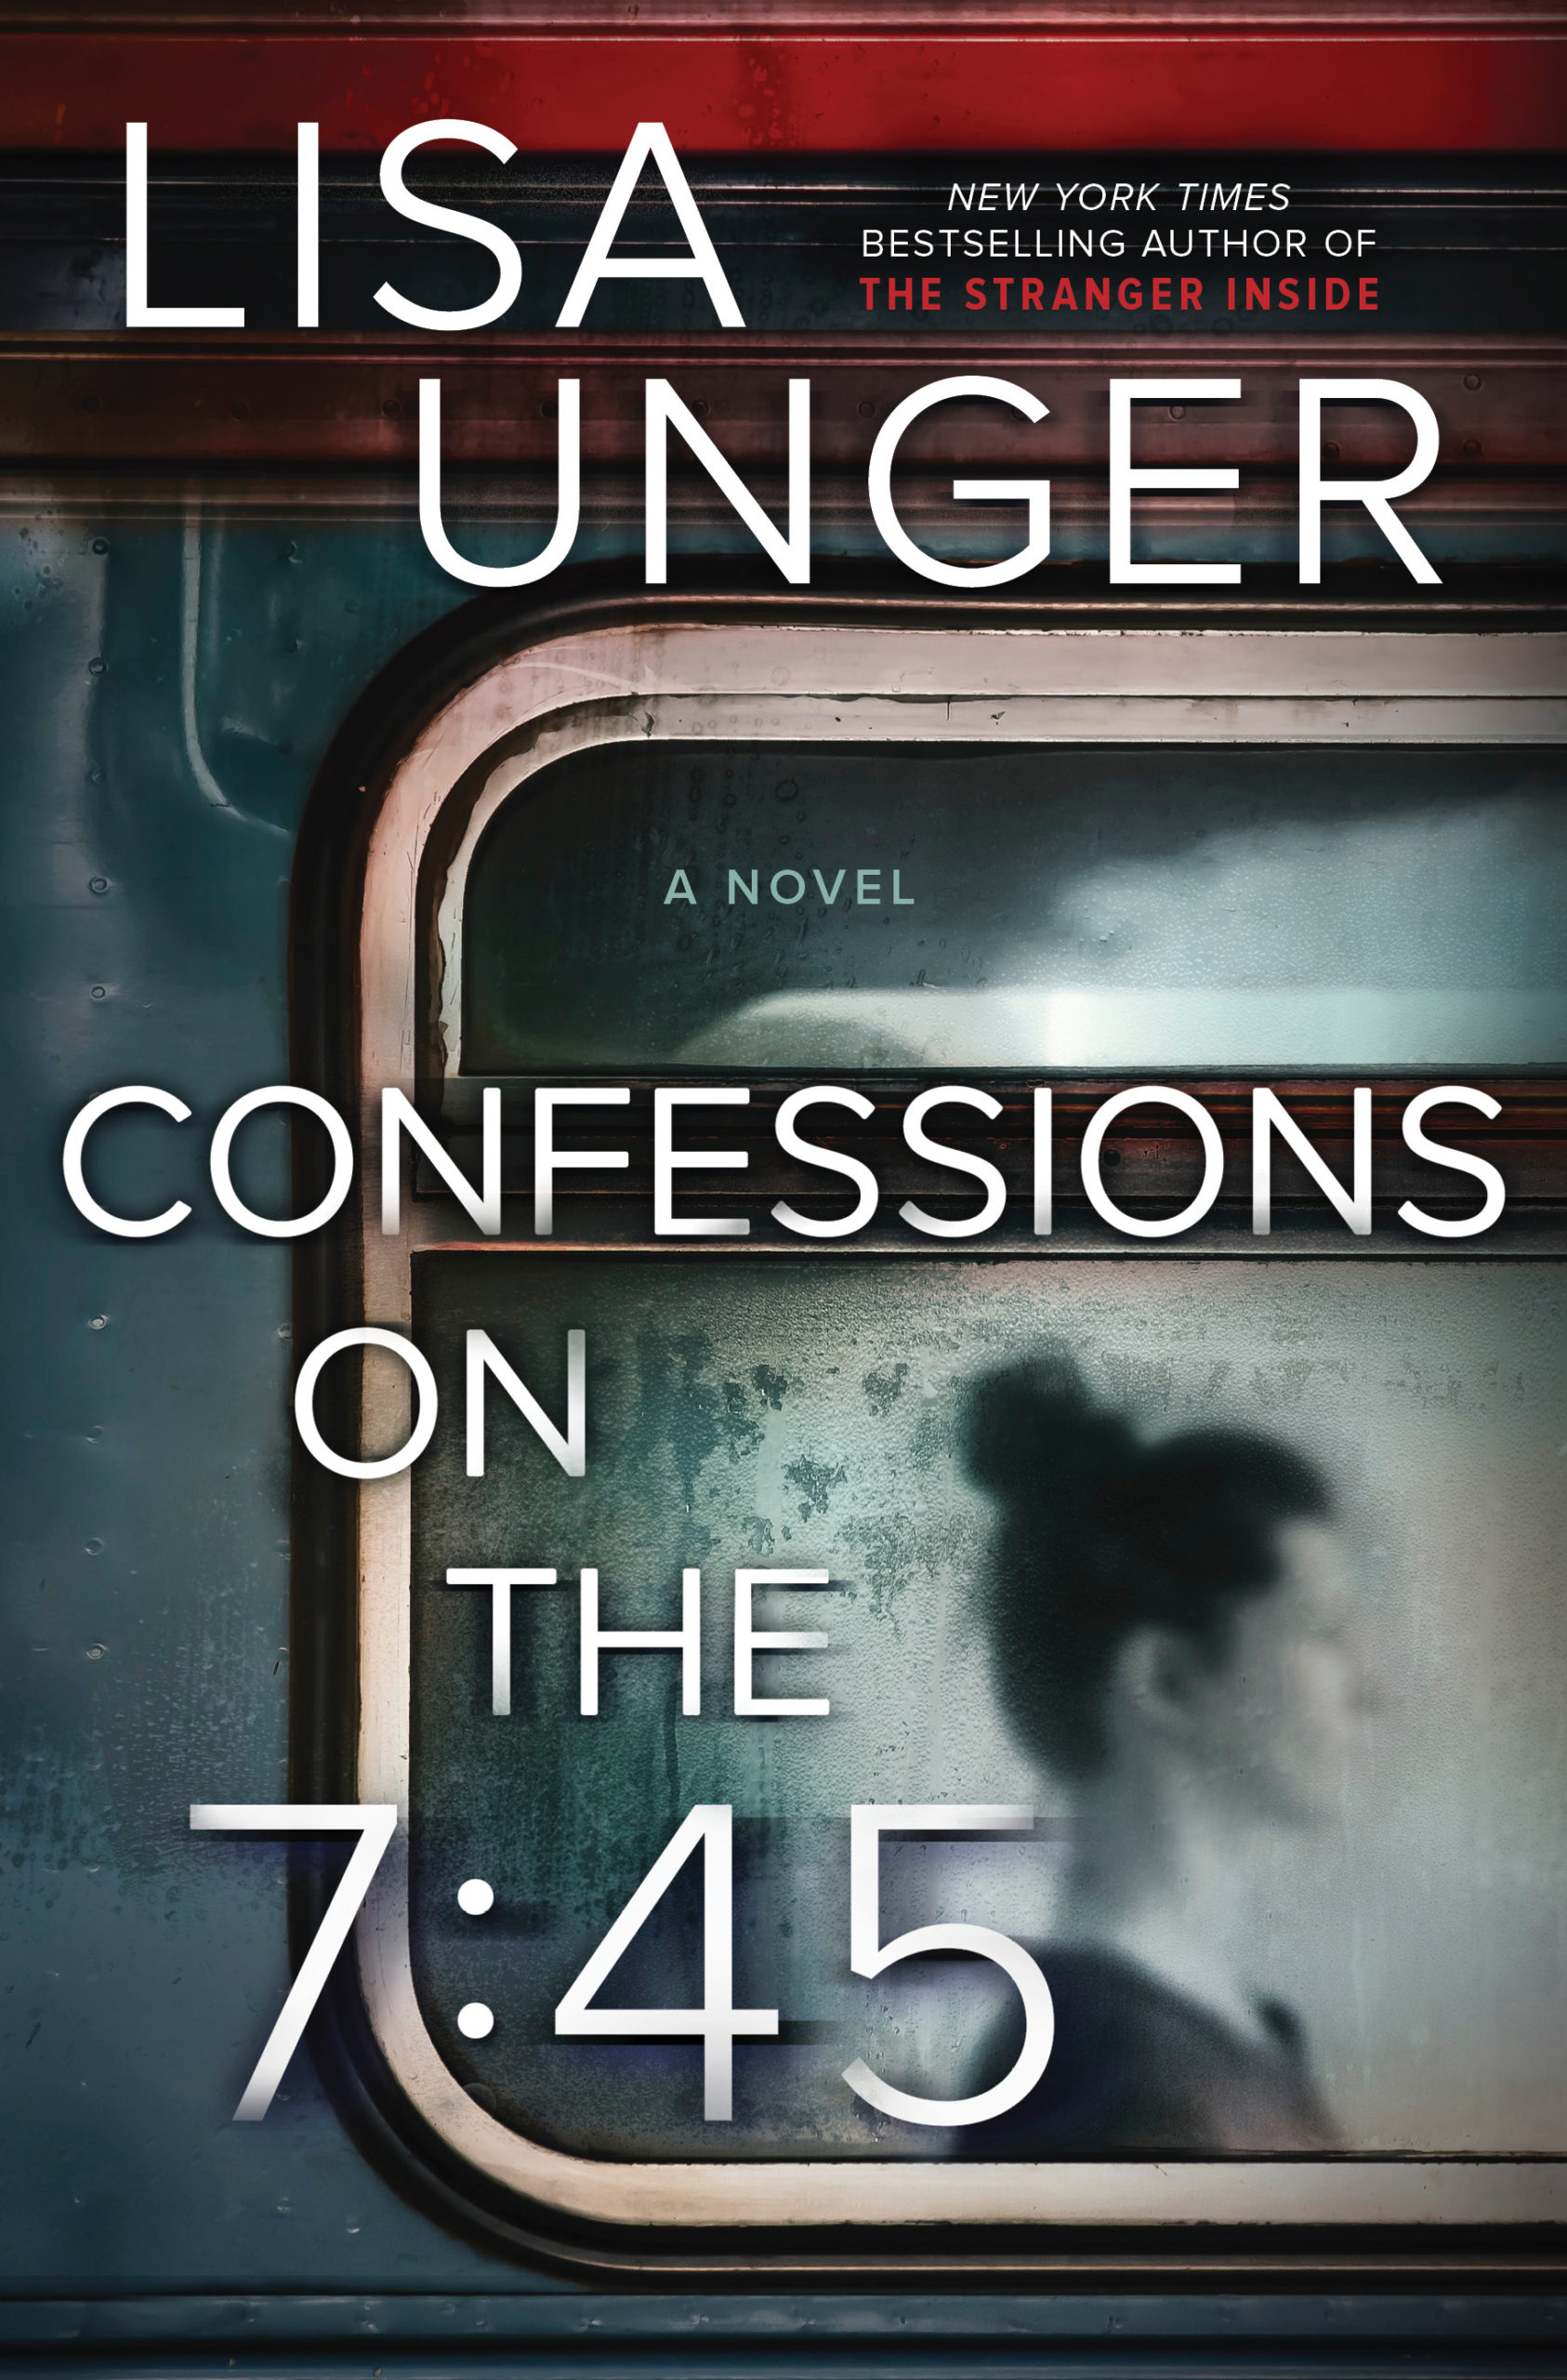 Confessions on the 7:45 by Lisa Unger book review